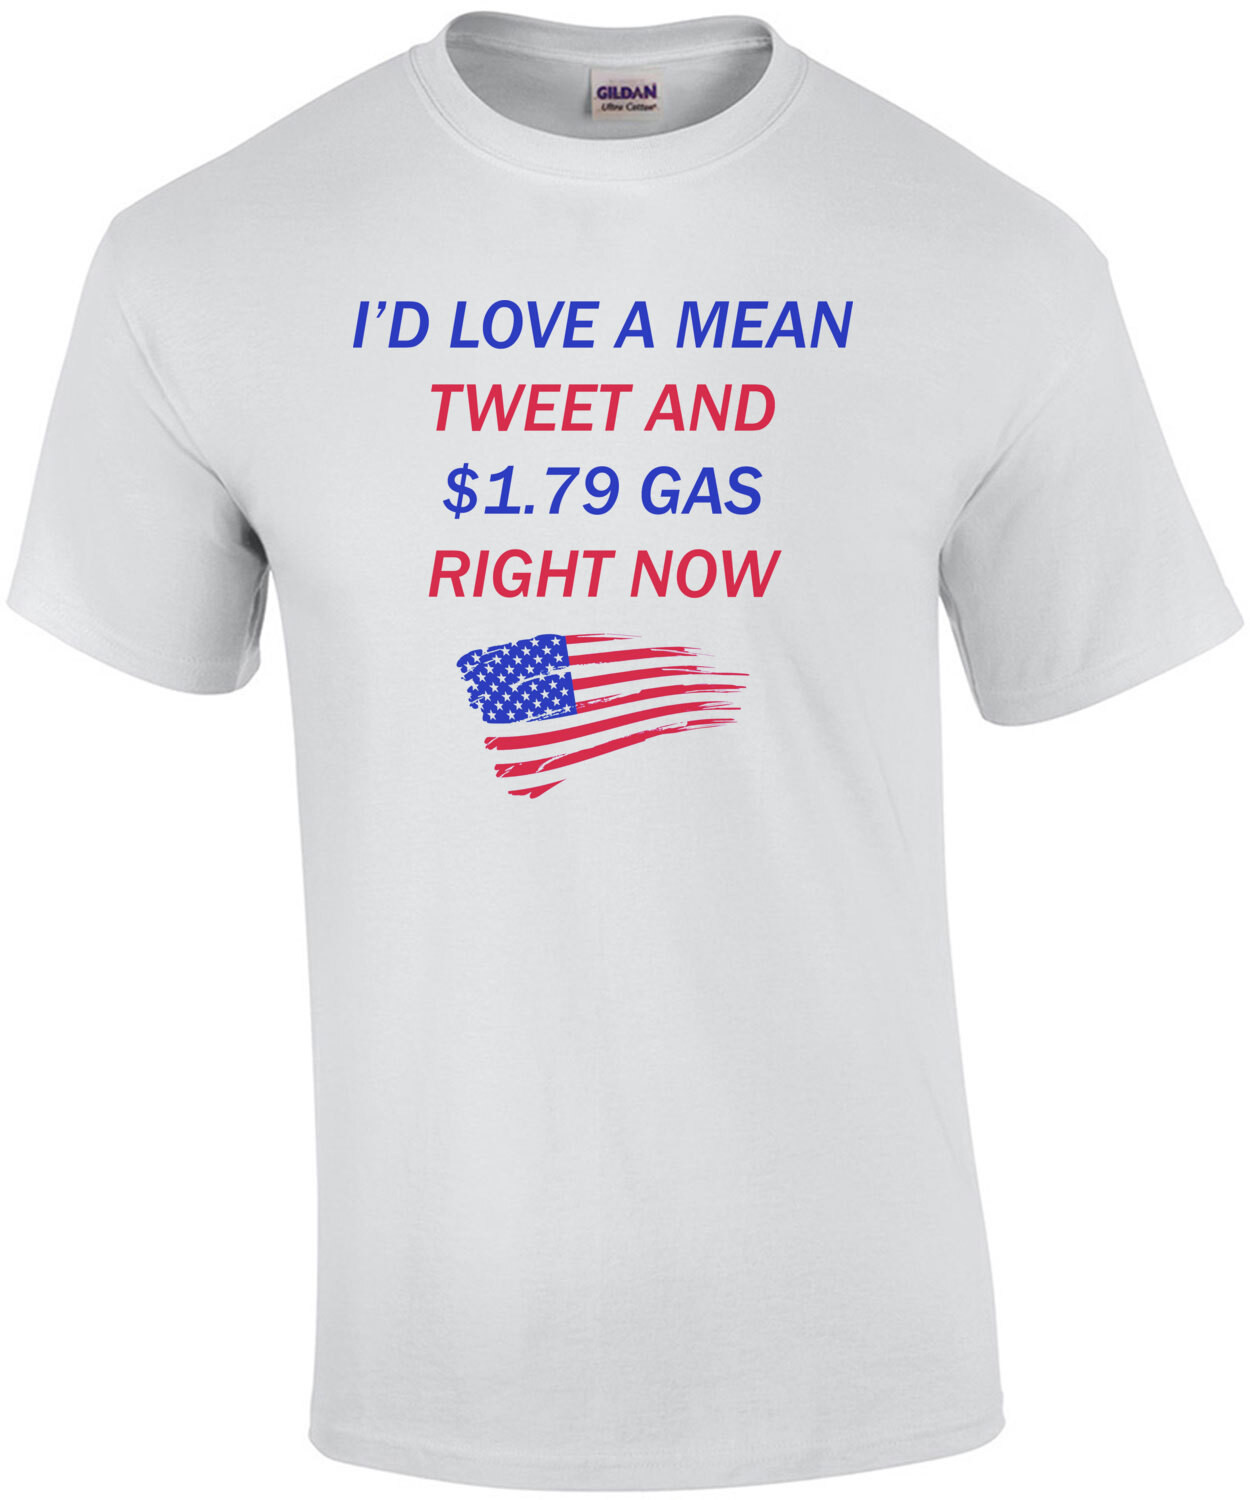 I’D LOVE A MEAN TWEET AND $1.79 GAS RIGHT NOW PRO TRUMP SHIRT